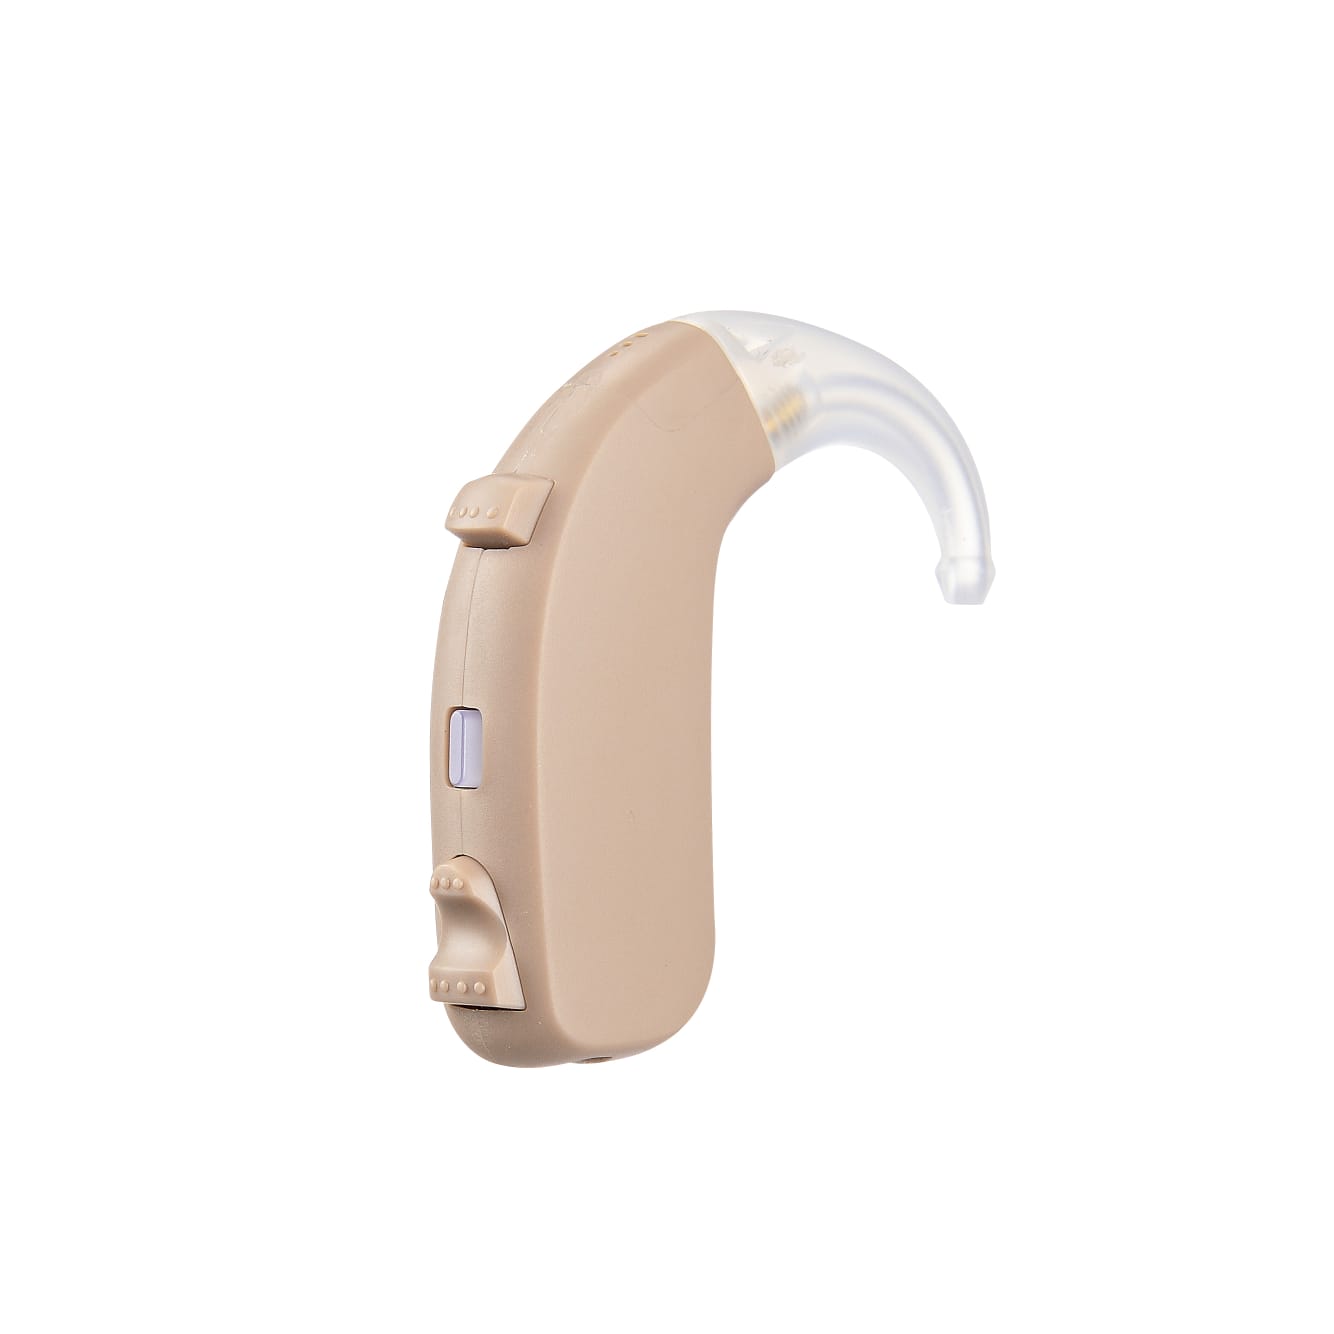 eEAR® Pair of BTE-26SP Peak Gain 76dB Improved Behind The Ear BTE Digital Hearing Aid Designed for Severe Hearing Loss Designed and Engineered in the USA Sold 5,000+ worldwide